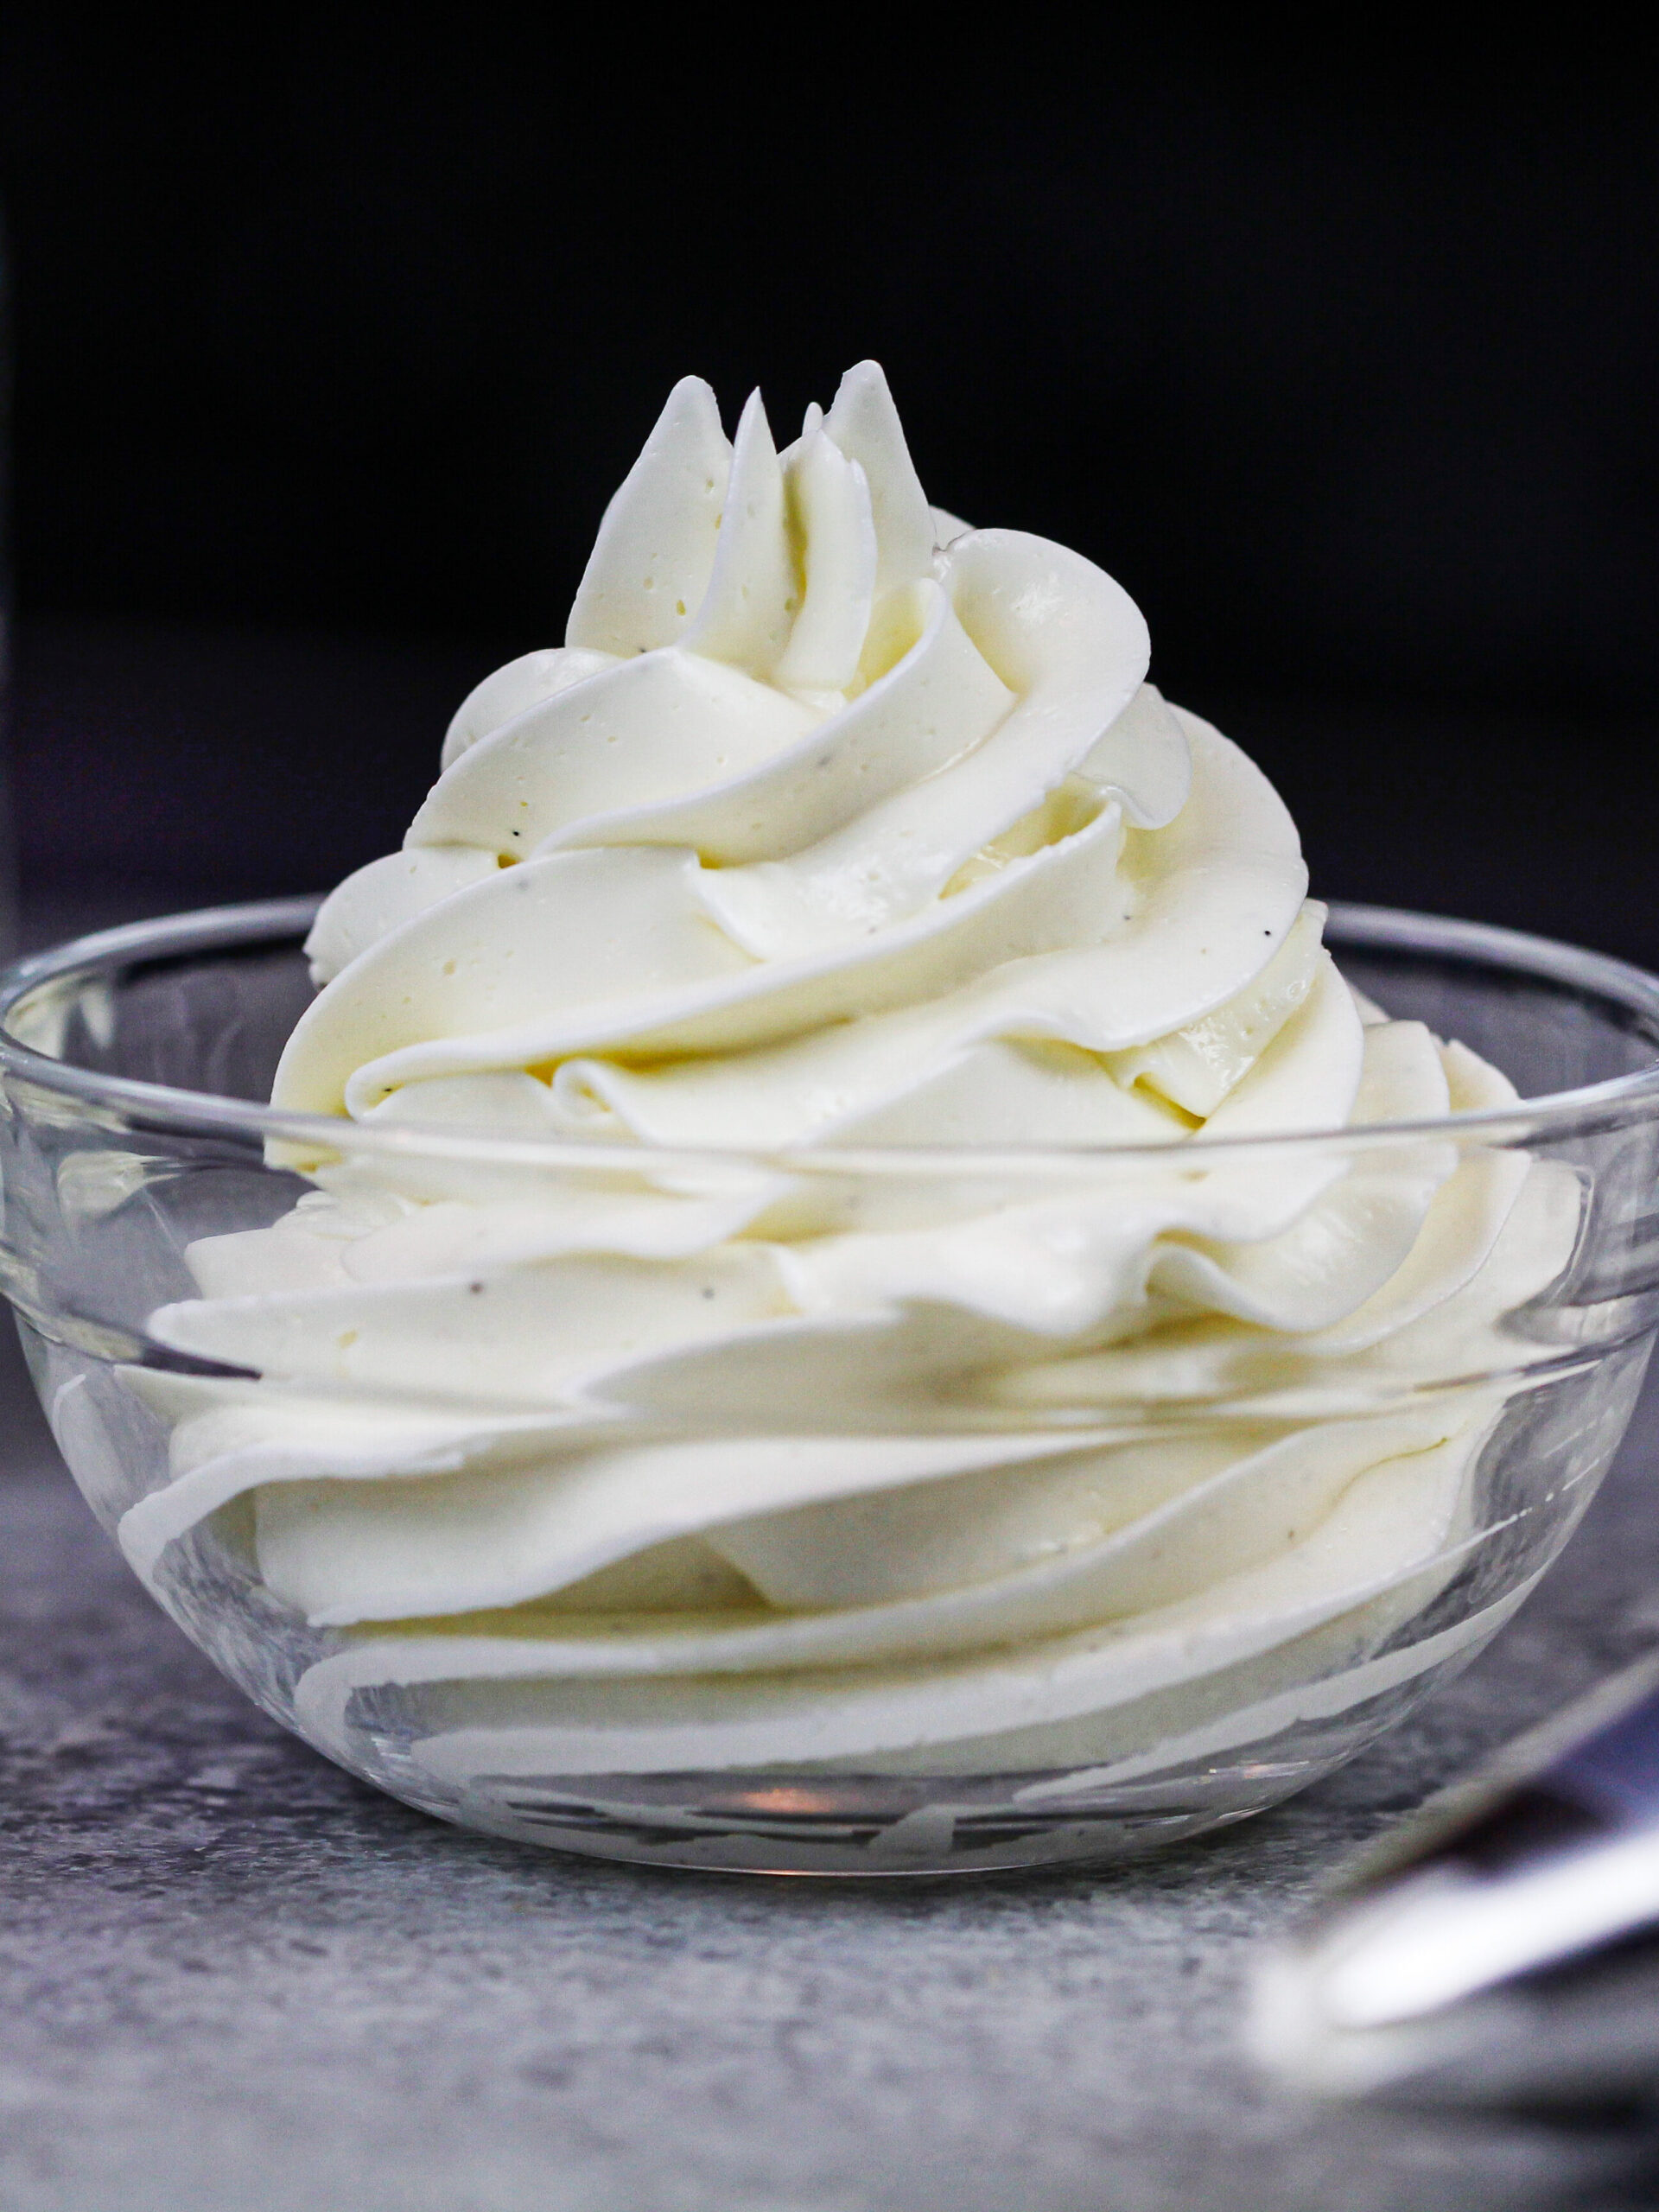 image of mascarpone cream piped into a dish to show how stable and pipeable it is
